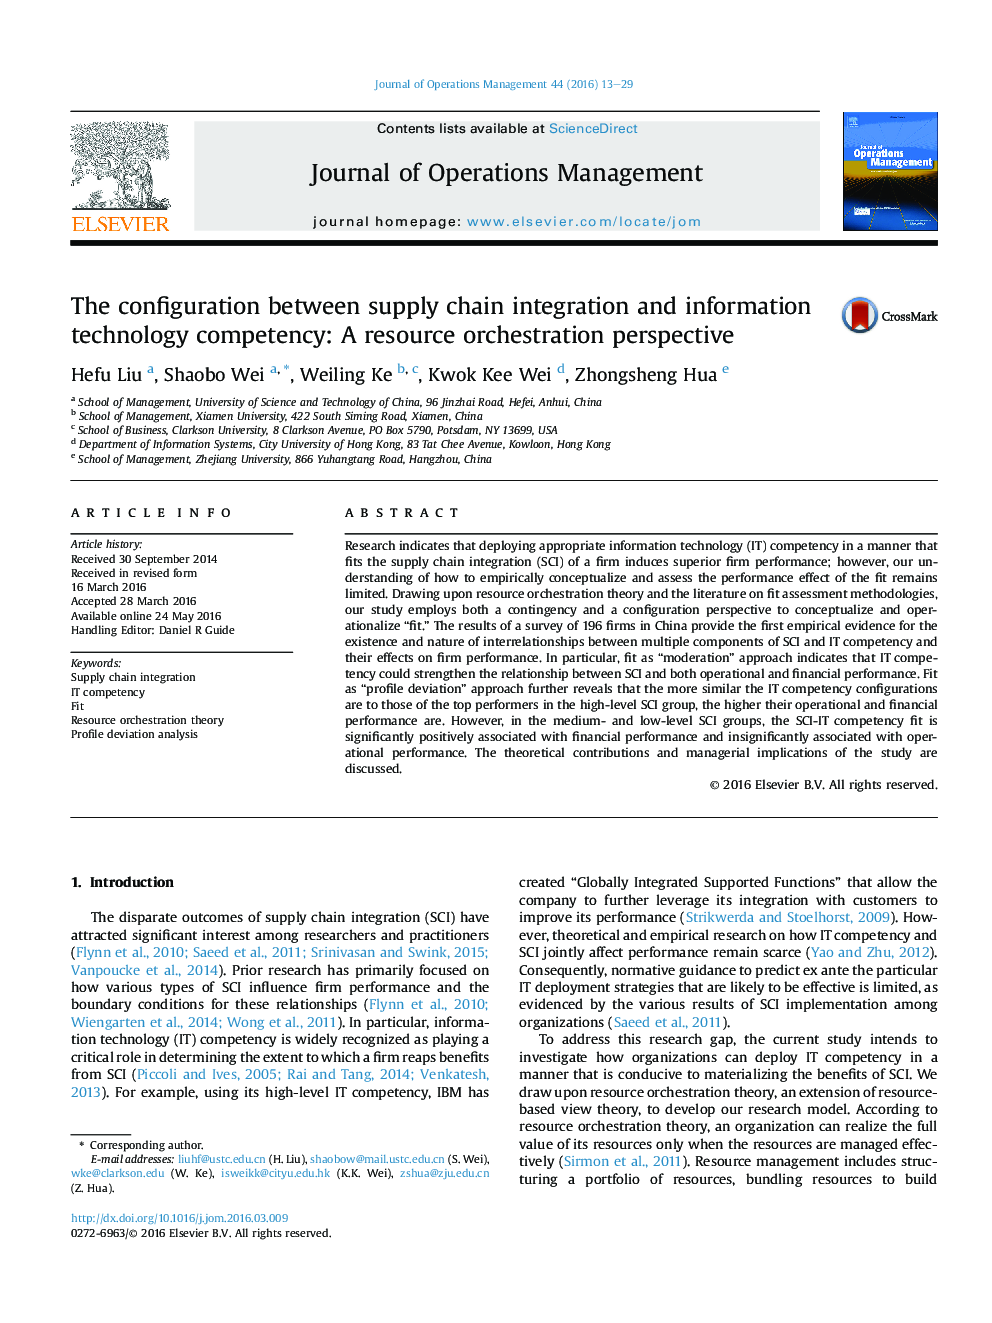 The configuration between supply chain integration and information technology competency: A resource orchestration perspective